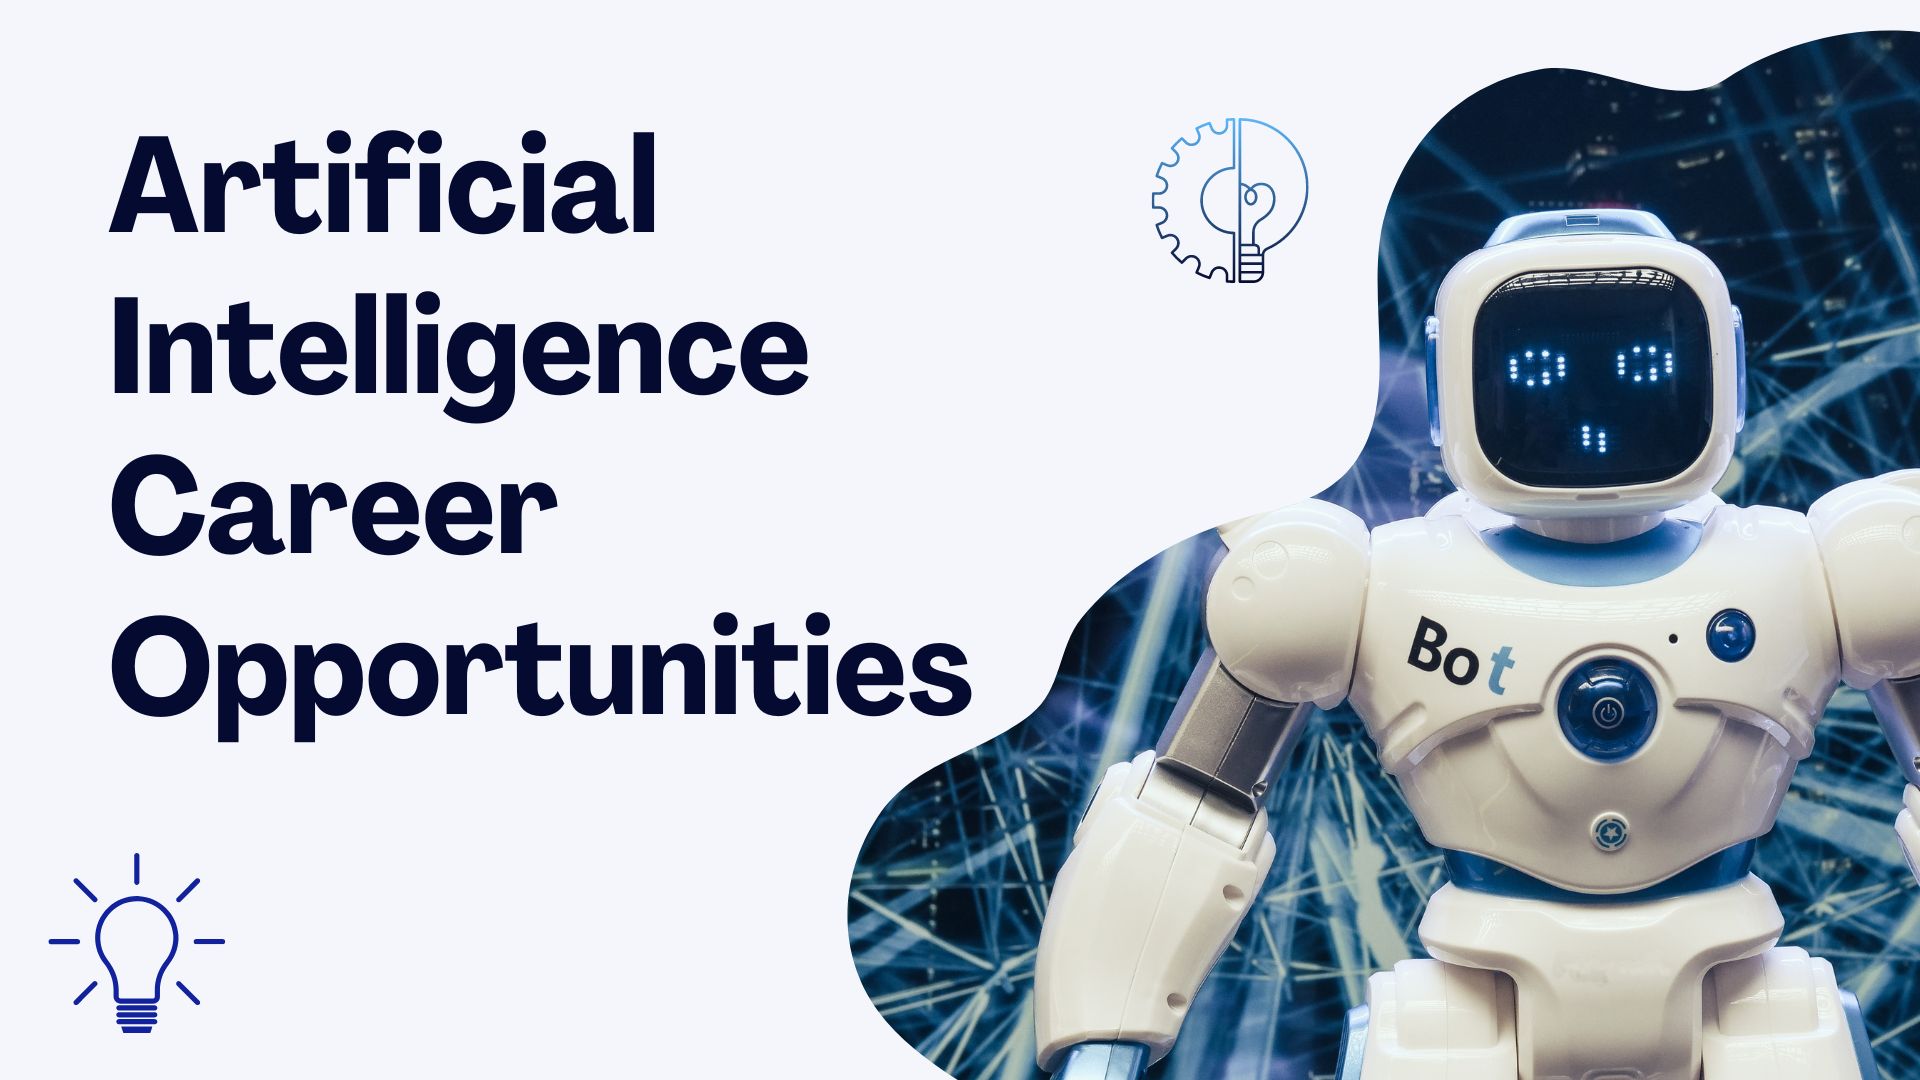 AI-ARTIFICIAL INTELLIGENCE CAREE OPPORTUNITIES